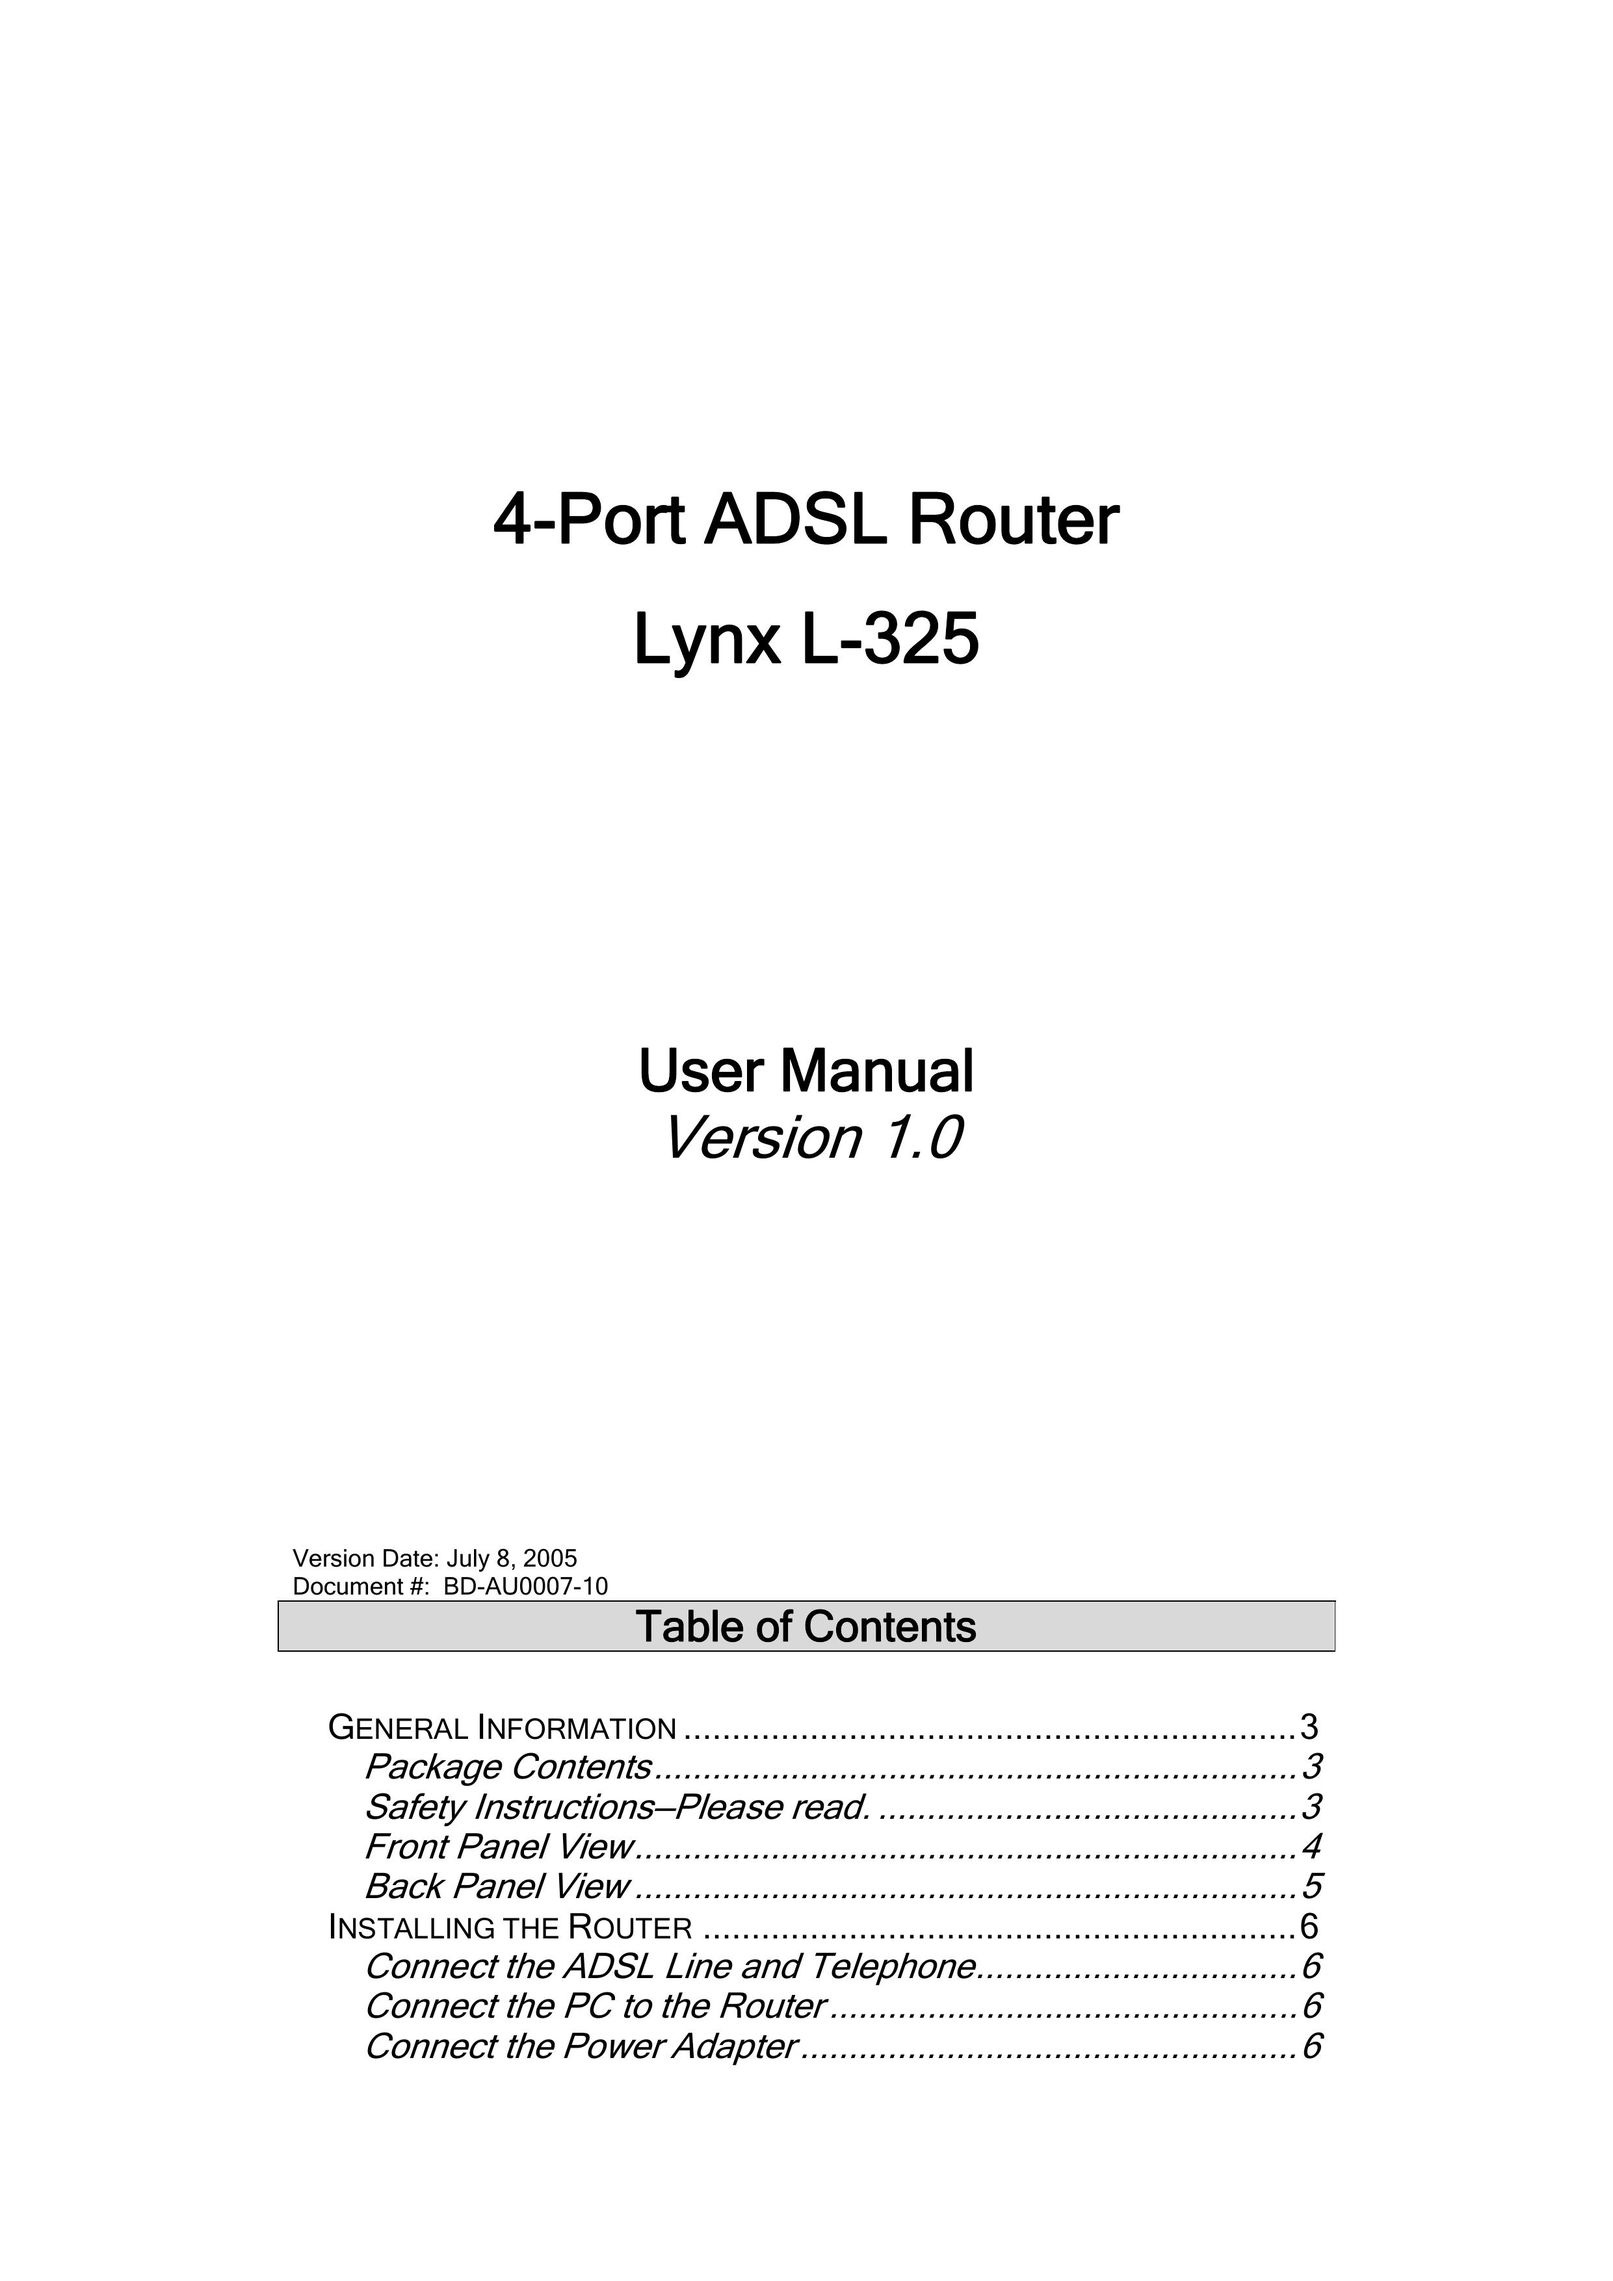 Lynx L-325 Network Router User Manual